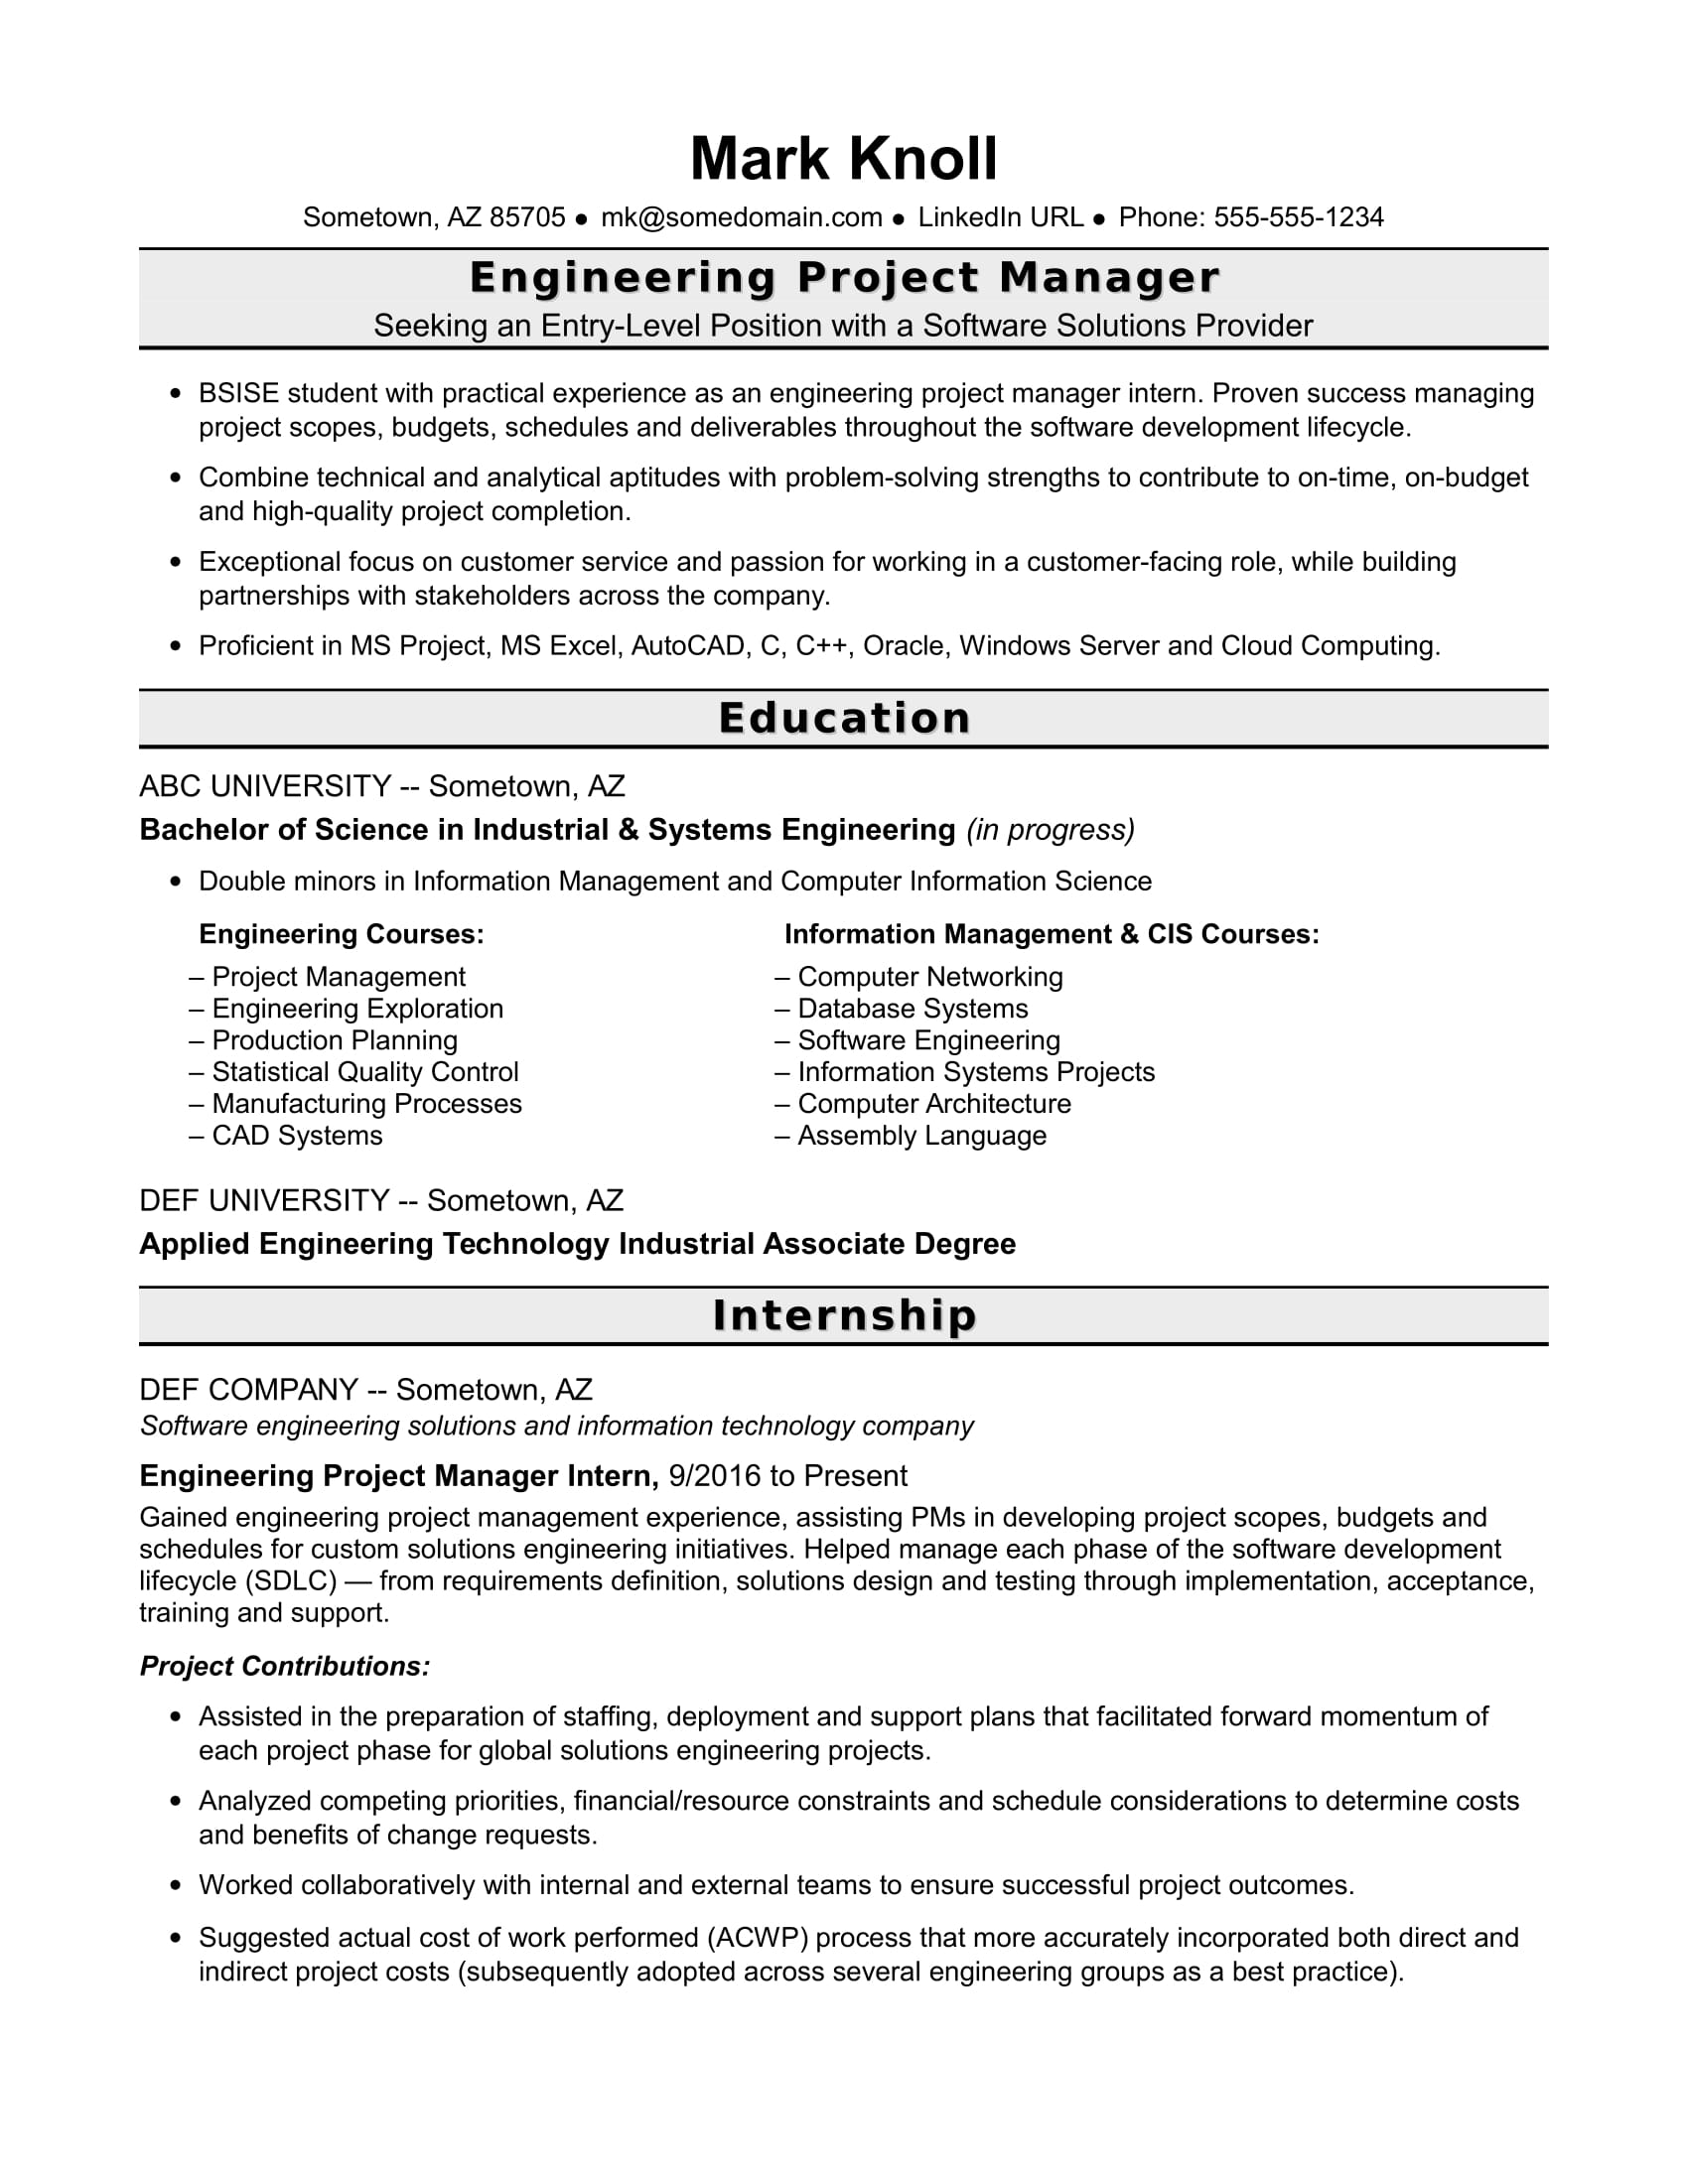 Entry Level Project Manager Resume For Engineers Monster Com